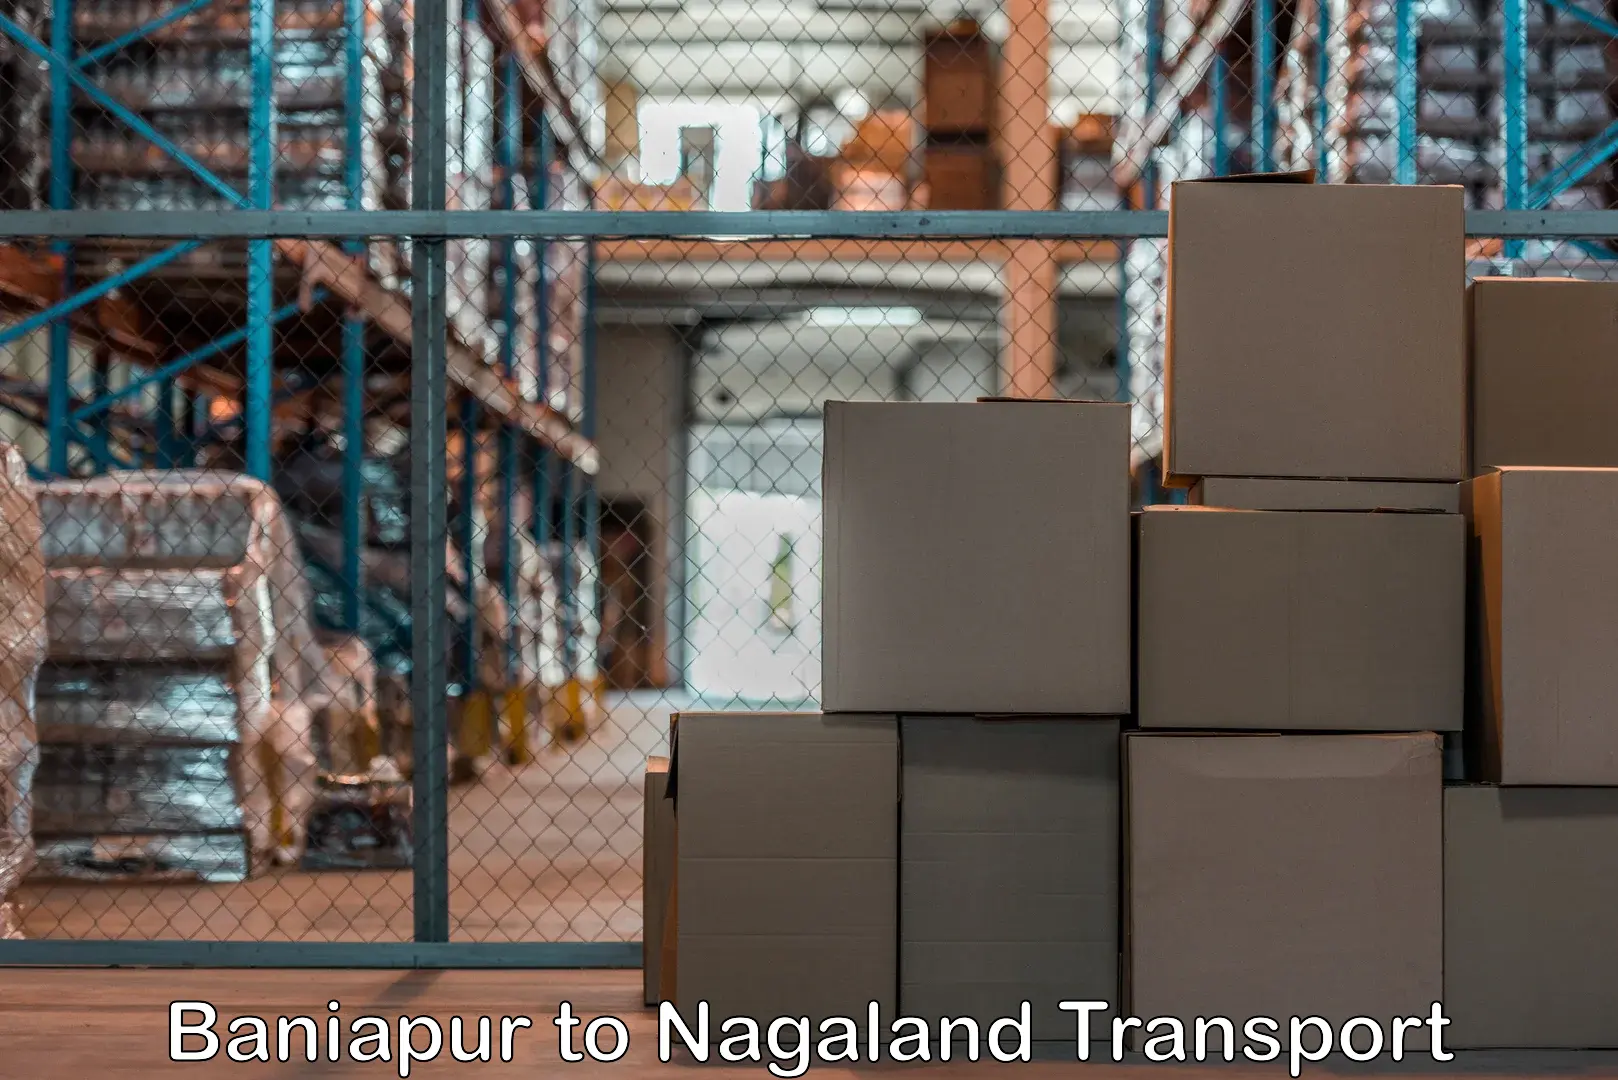 Daily parcel service transport in Baniapur to Dimapur